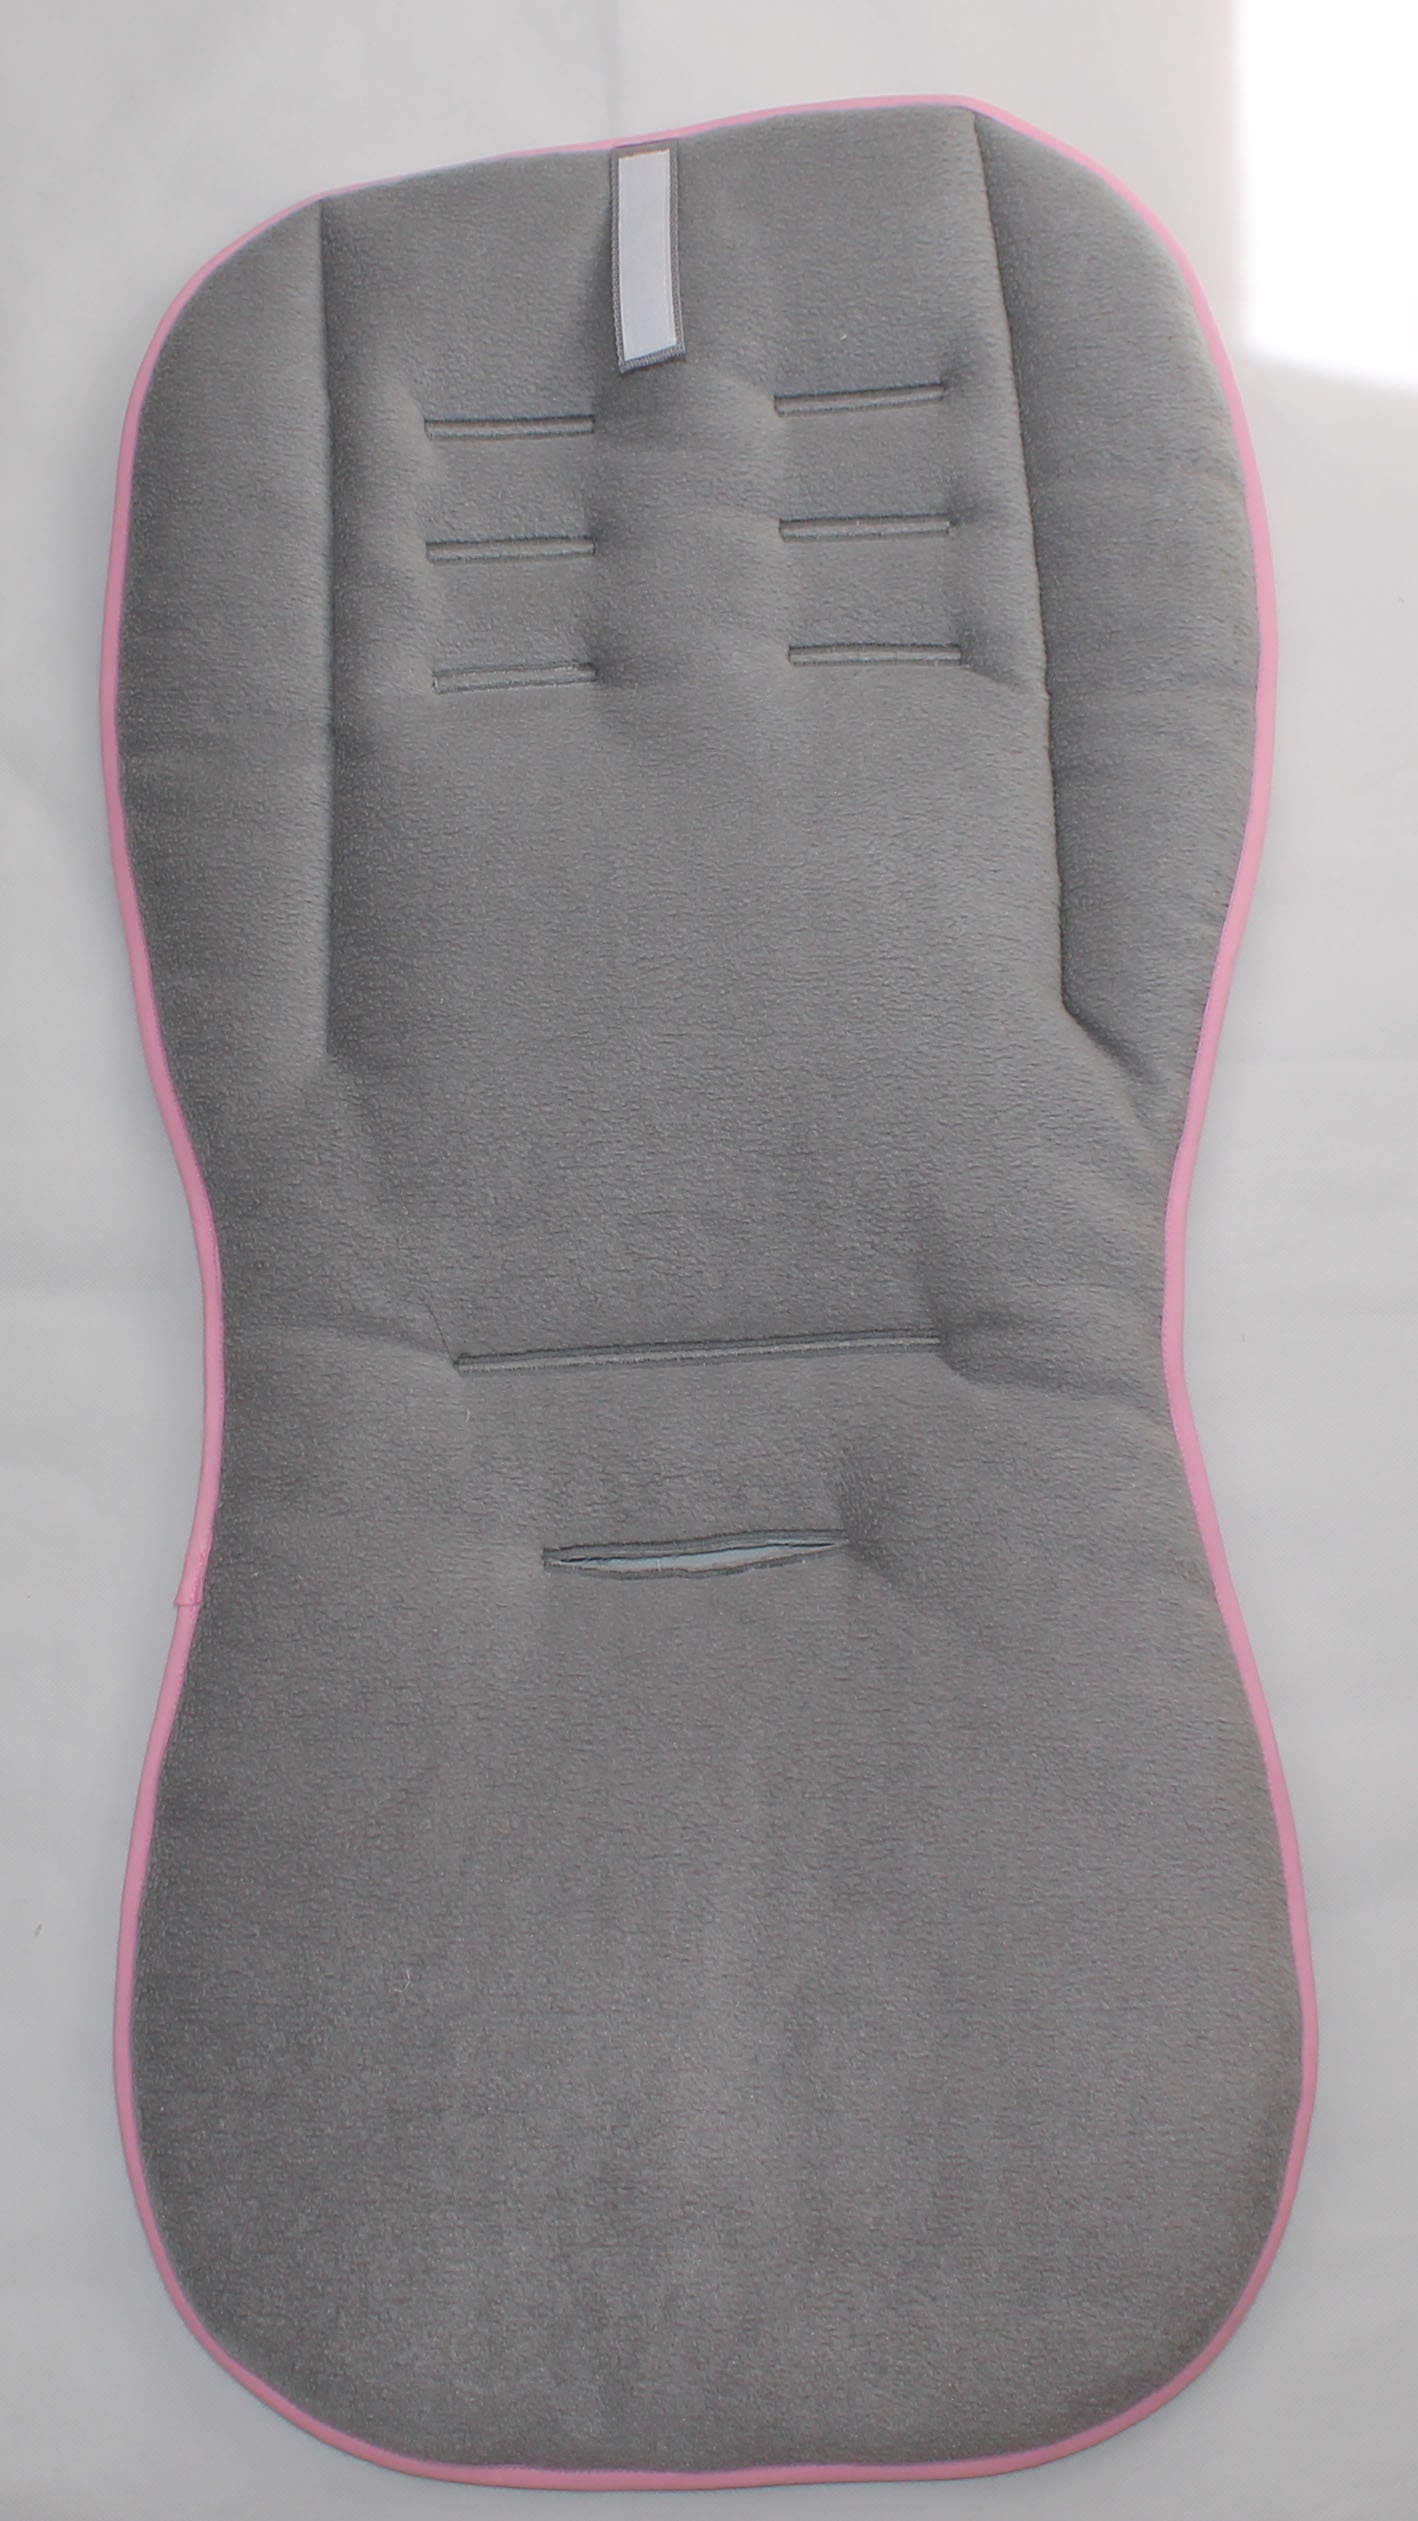 Seat liner for \u201cJoie Litetrax,Chrome,Mytrax,Pact,Mirus Free choice from 210 fabric patterns available